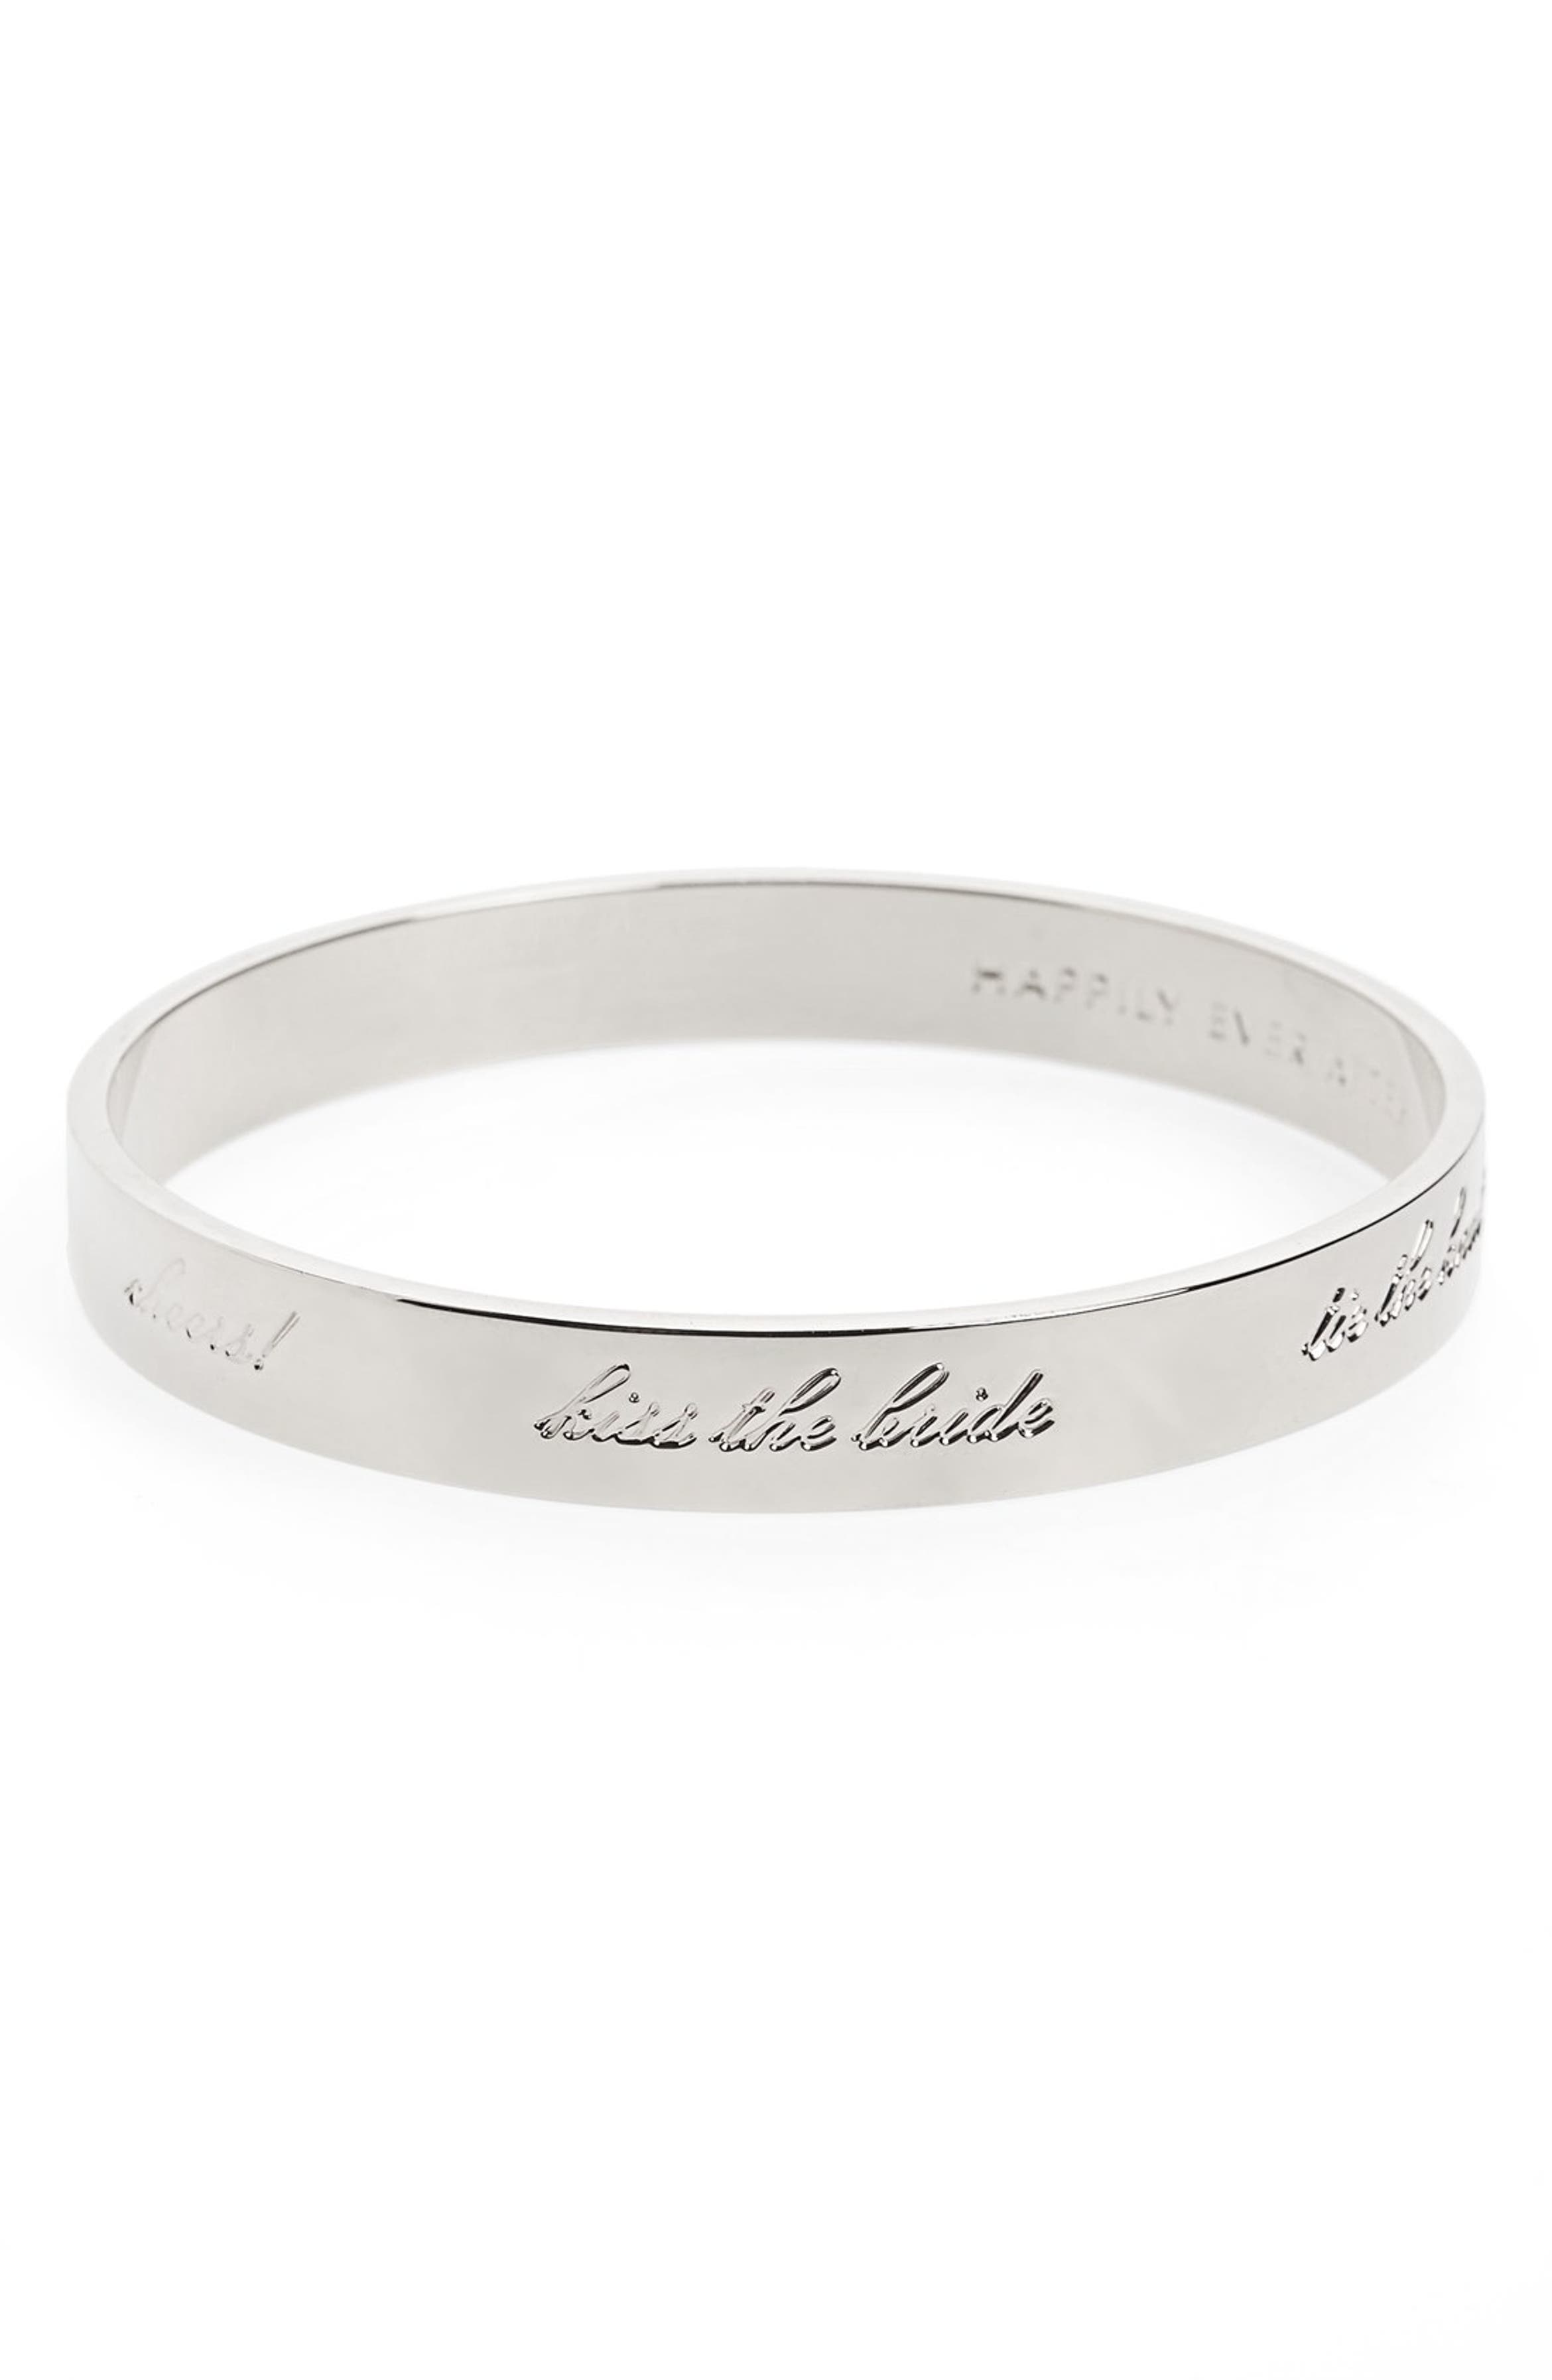 kate spade new york 'idiom happily ever after' bangle